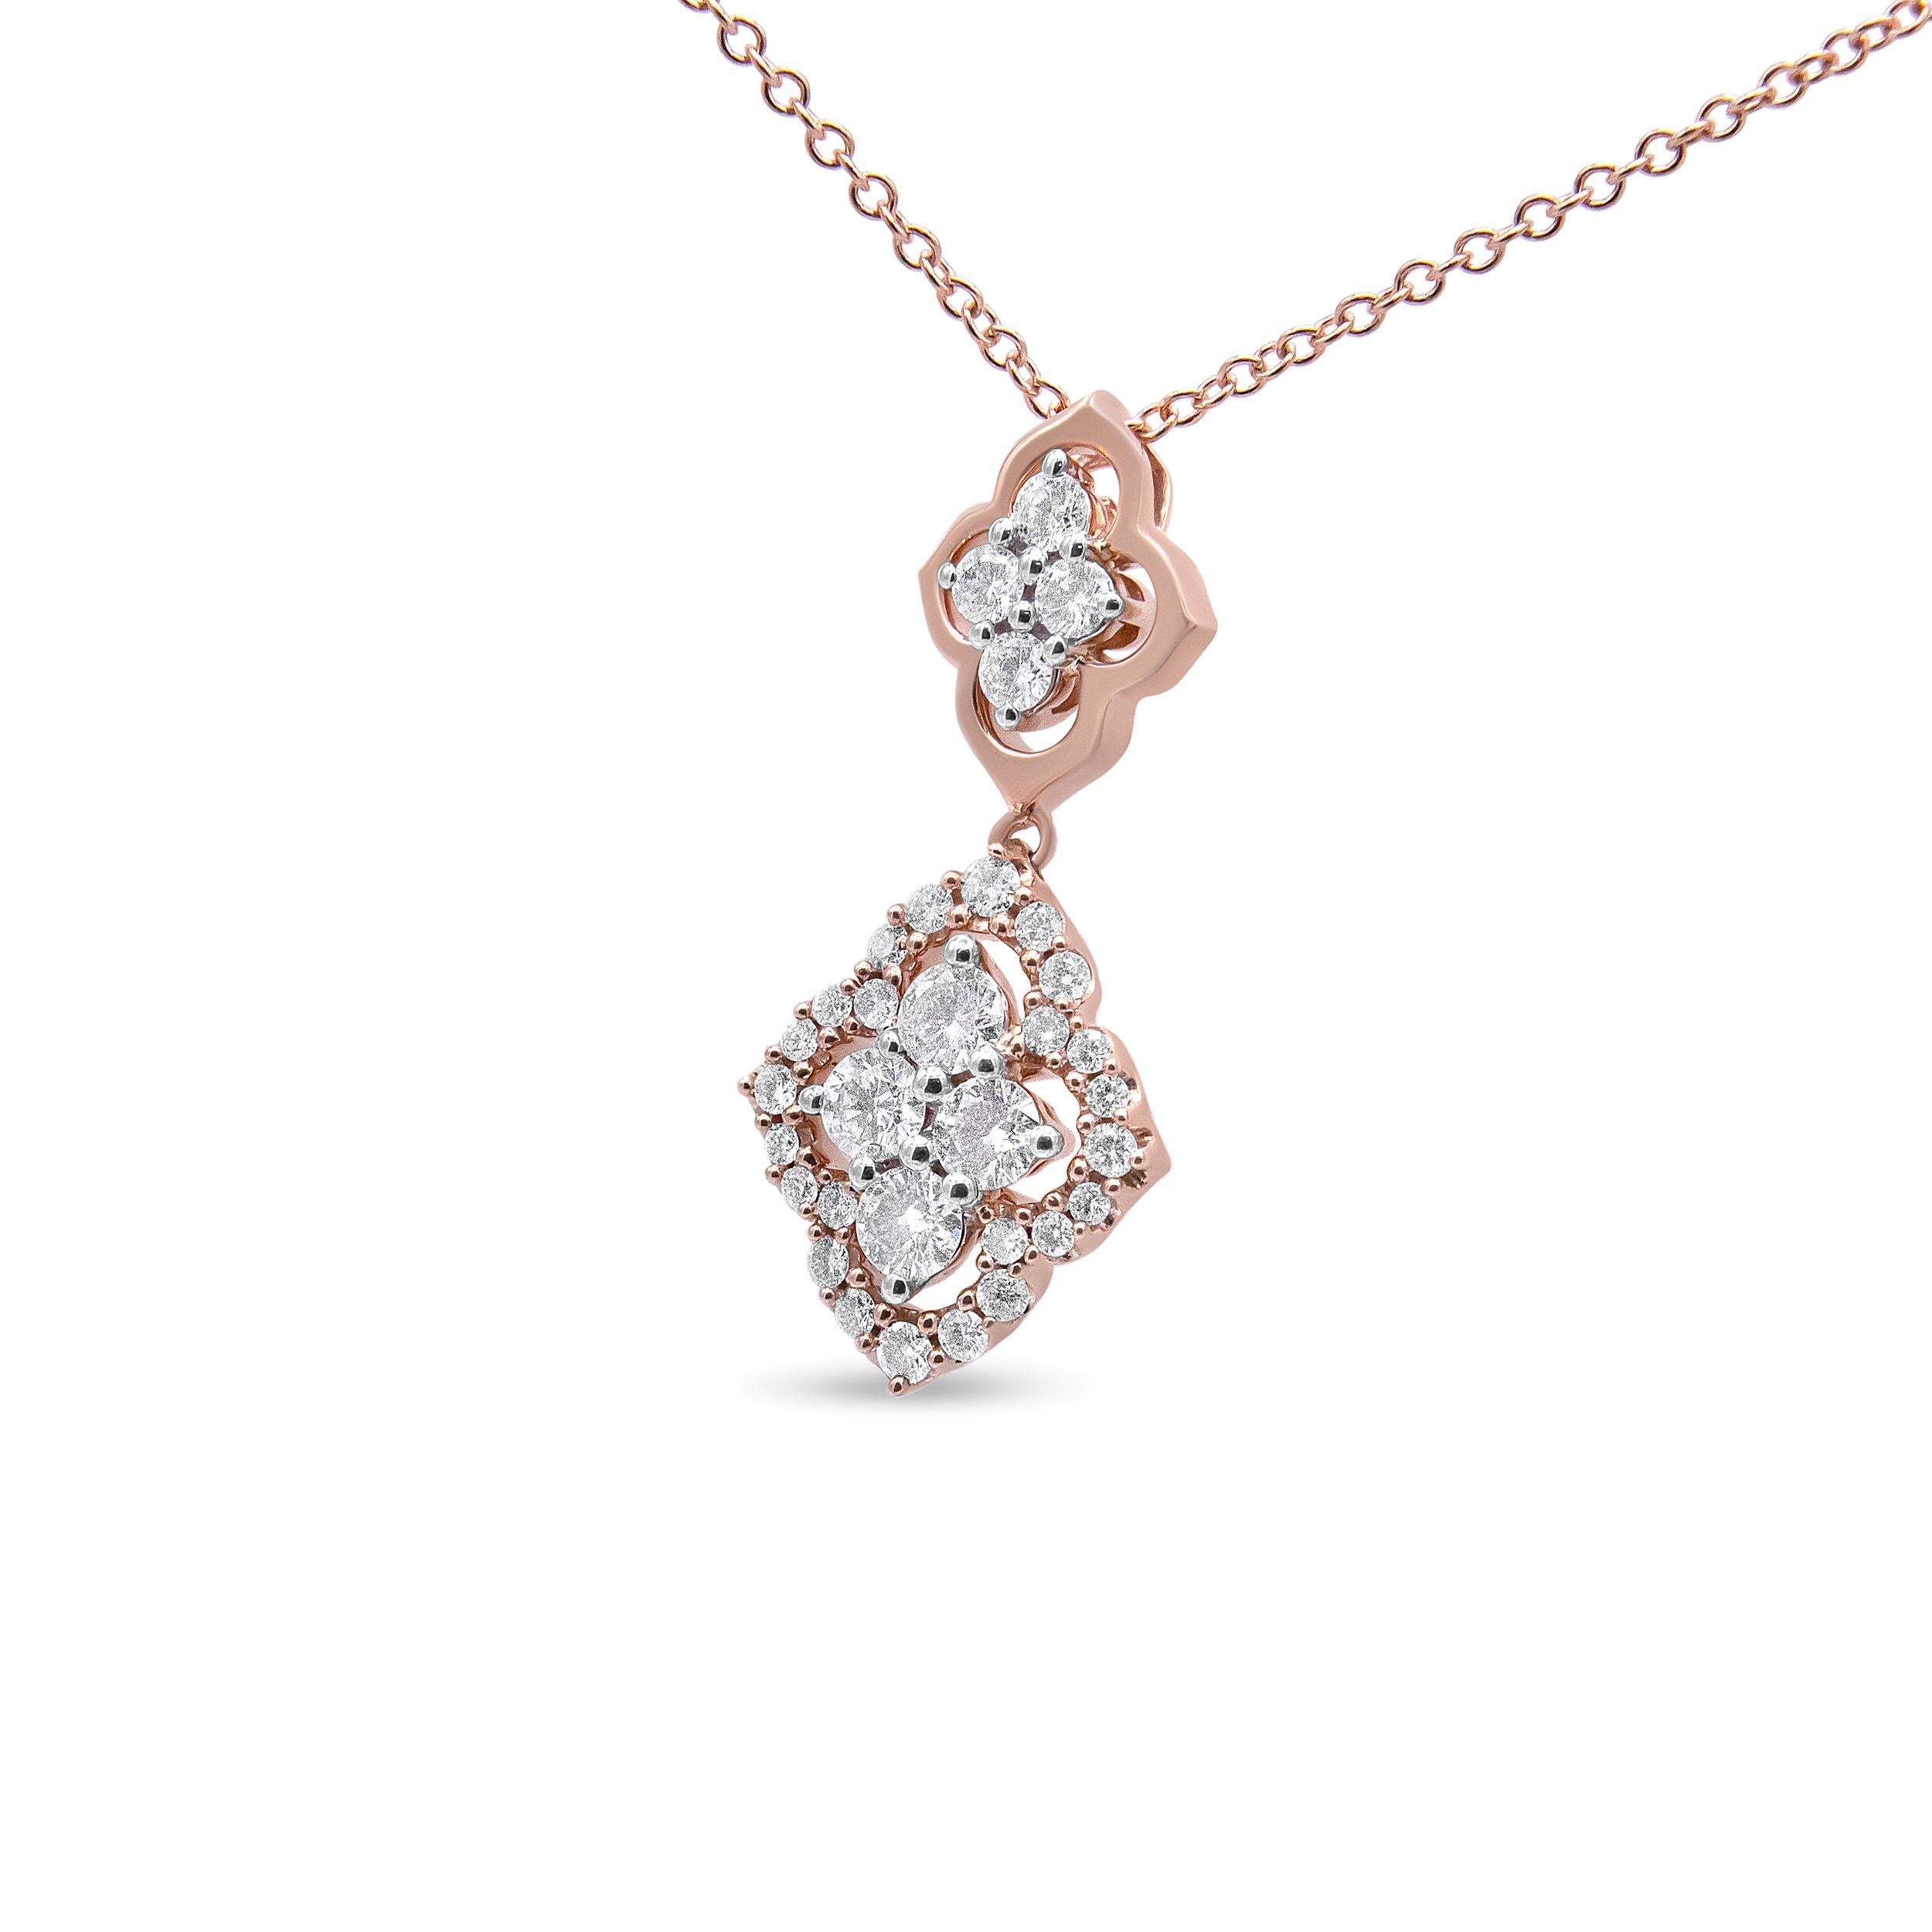 Accent your outfits with this exquisite diamond pendant necklace. This geometrically-inspired pendant features two unique quatrefoil designs. The top quatrefoil features four round white diamonds in a shared prong setting surrounded by a